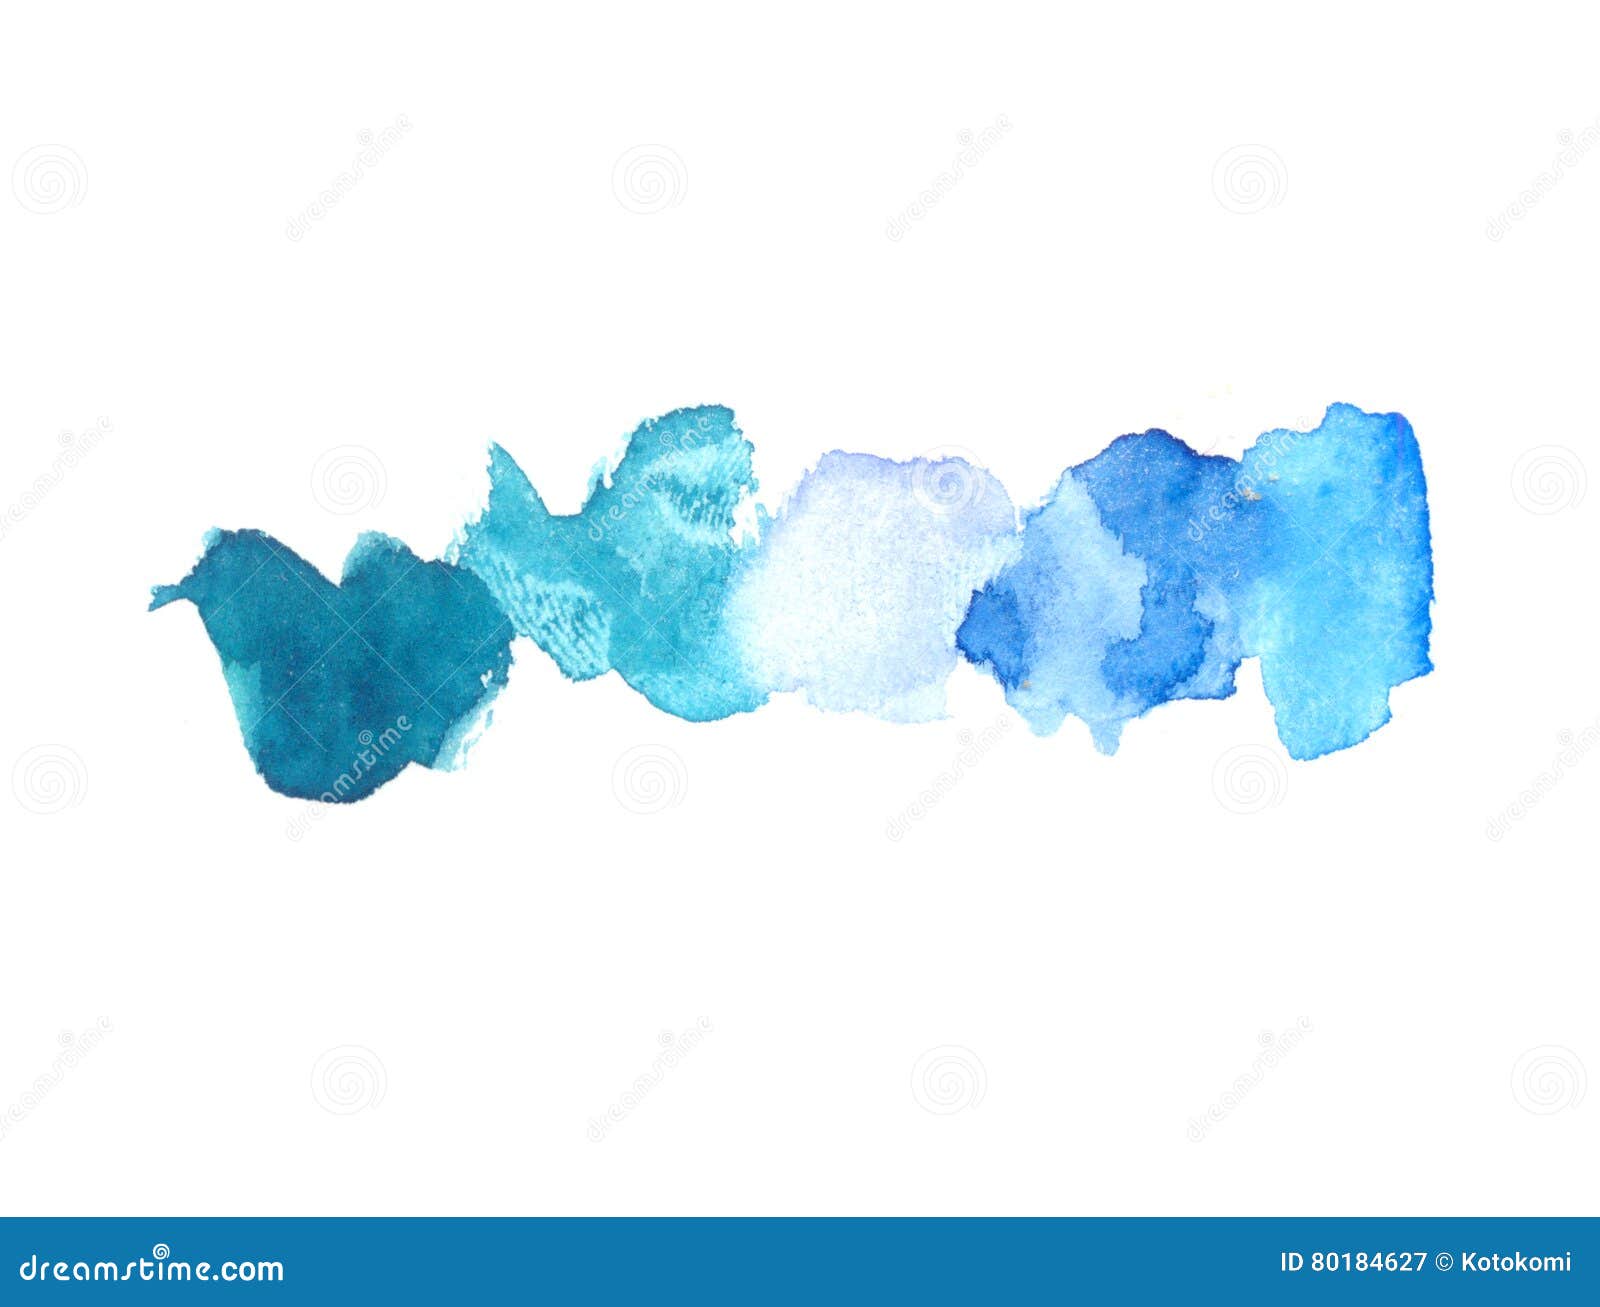 abstract watercolor texture with painted stains and strokes. delicate artistic background. mix of blue colors.